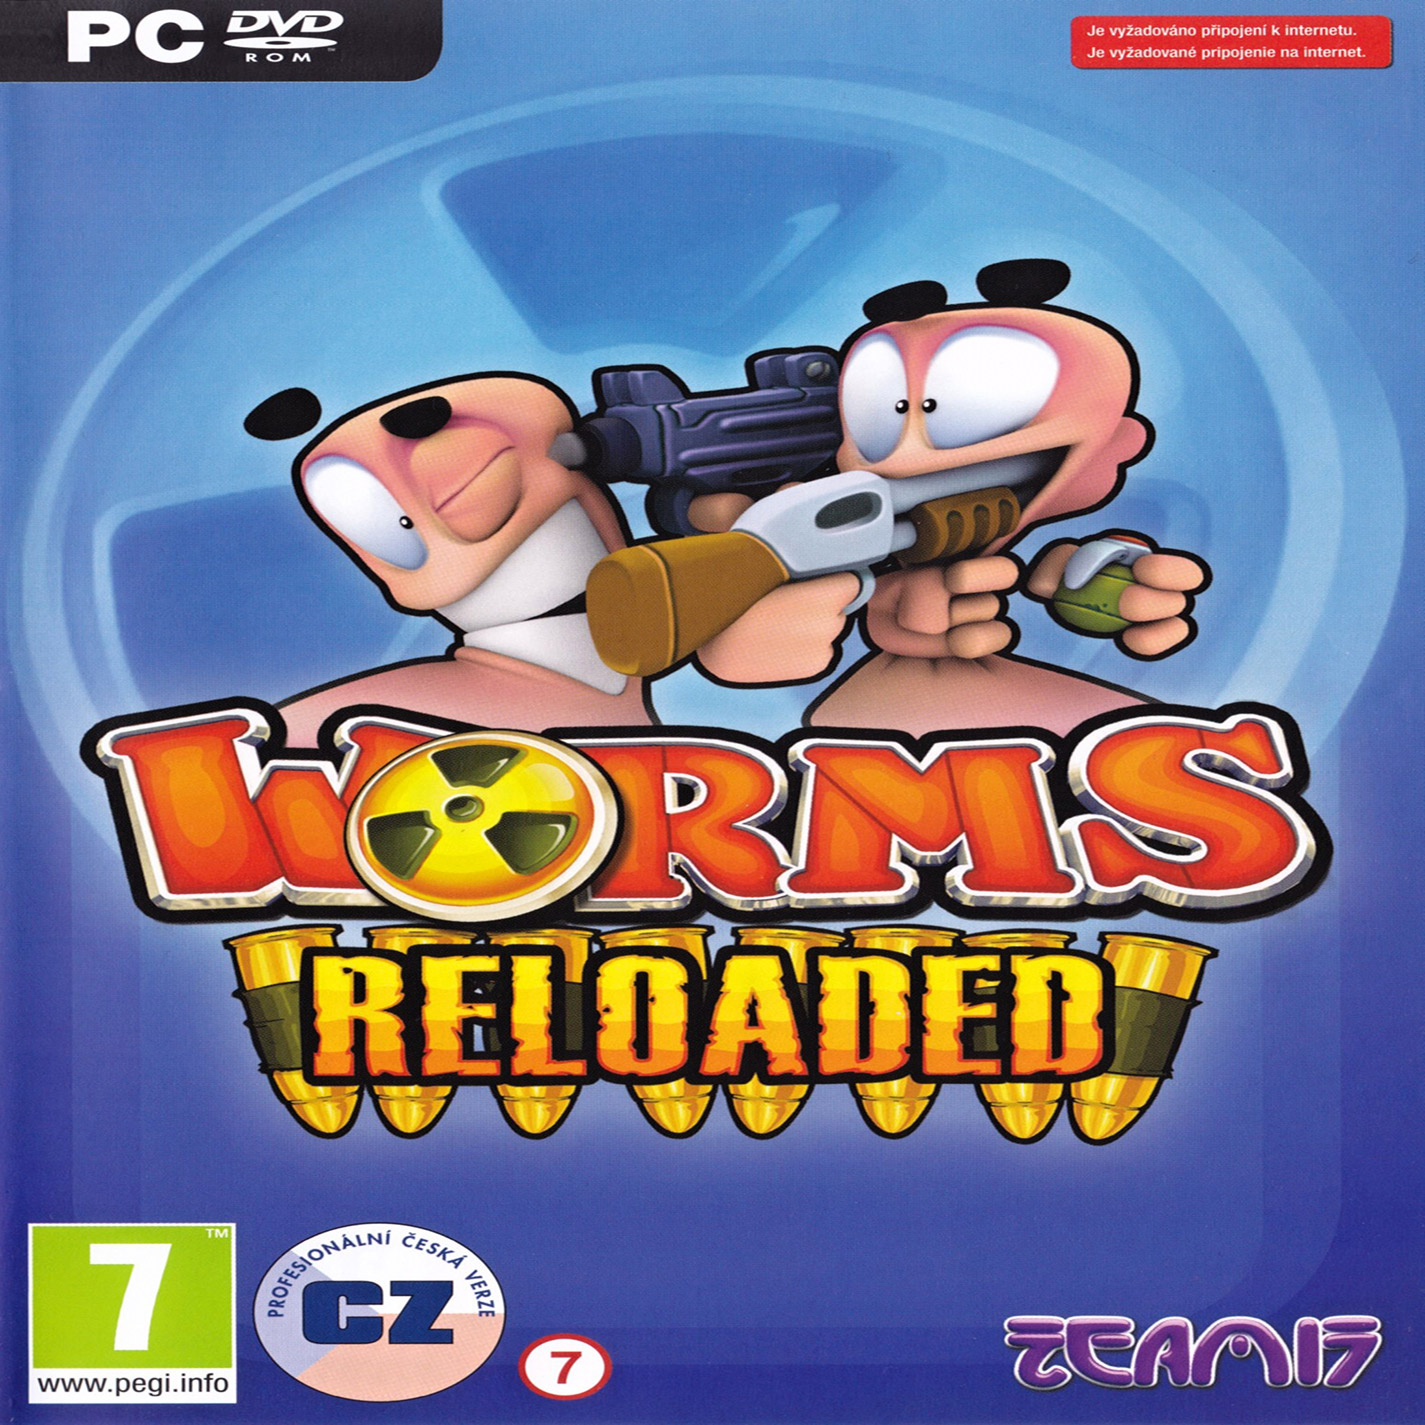 Worms Reloaded - pedn CD obal